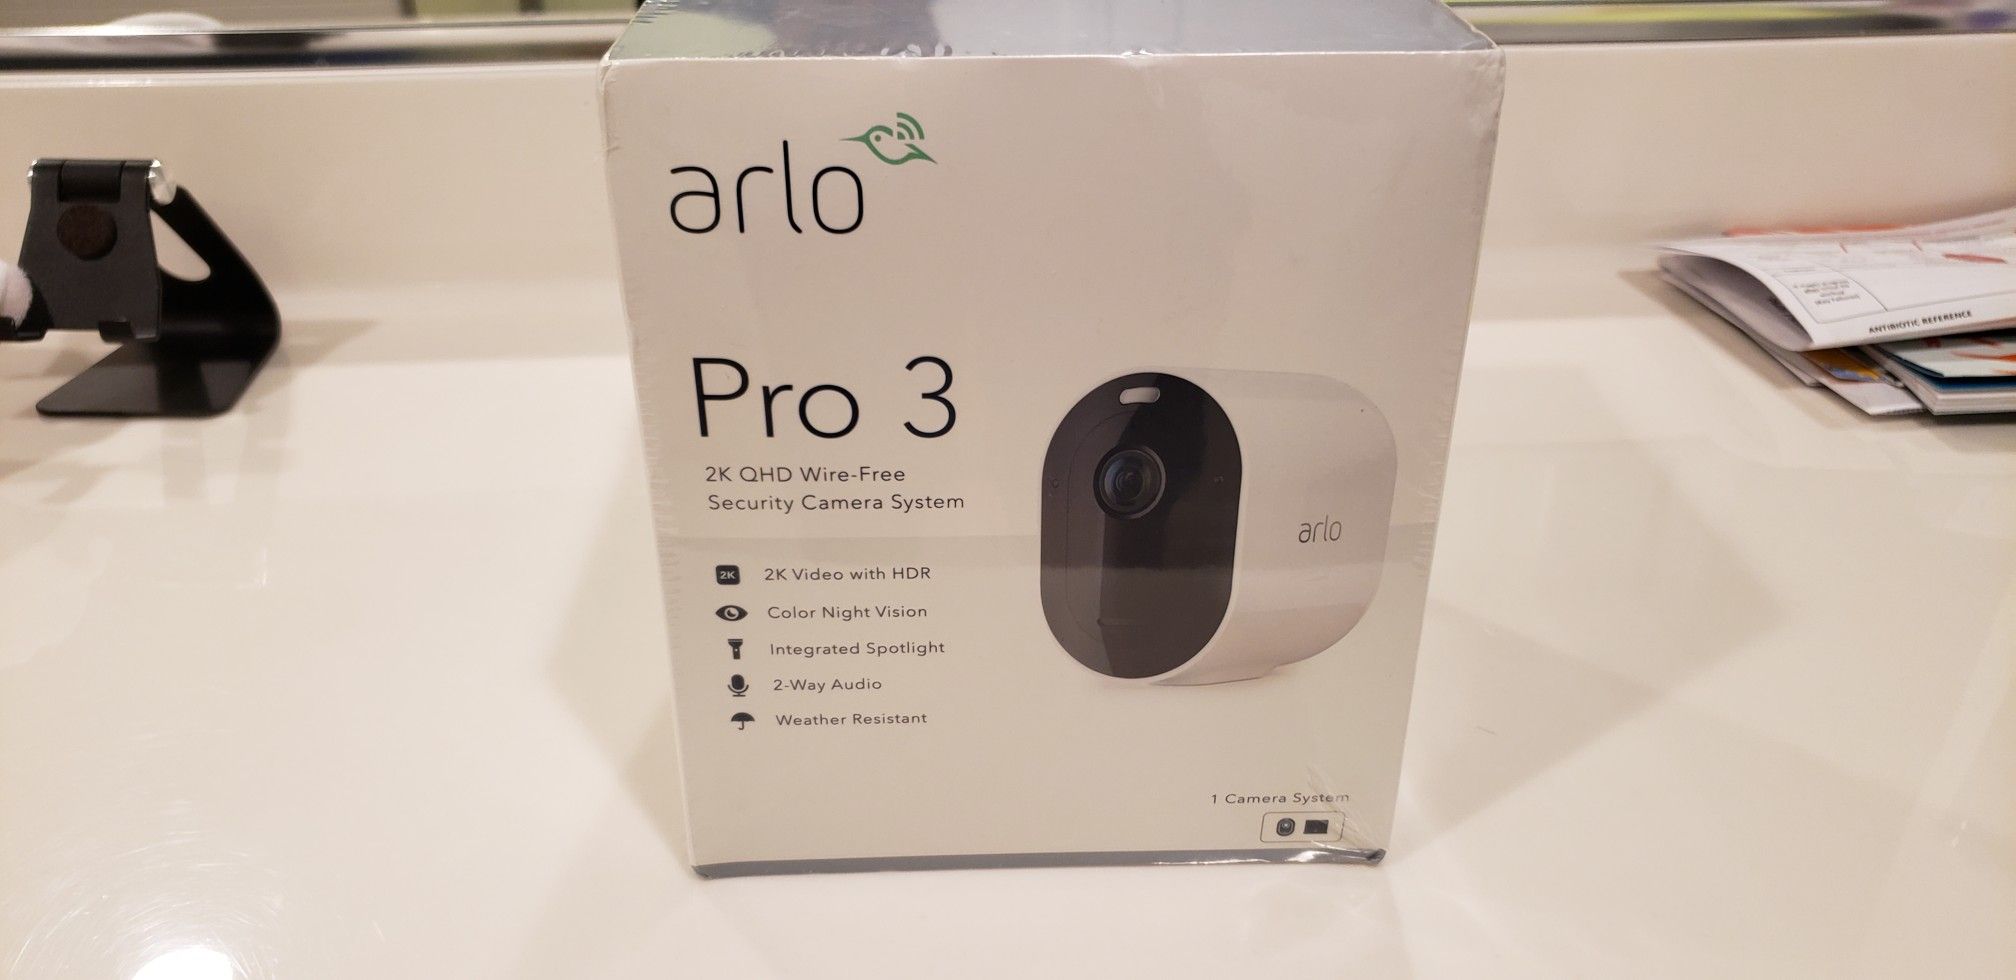 Arlo Pro 3 2K QHD Wire-Free Security Camera System